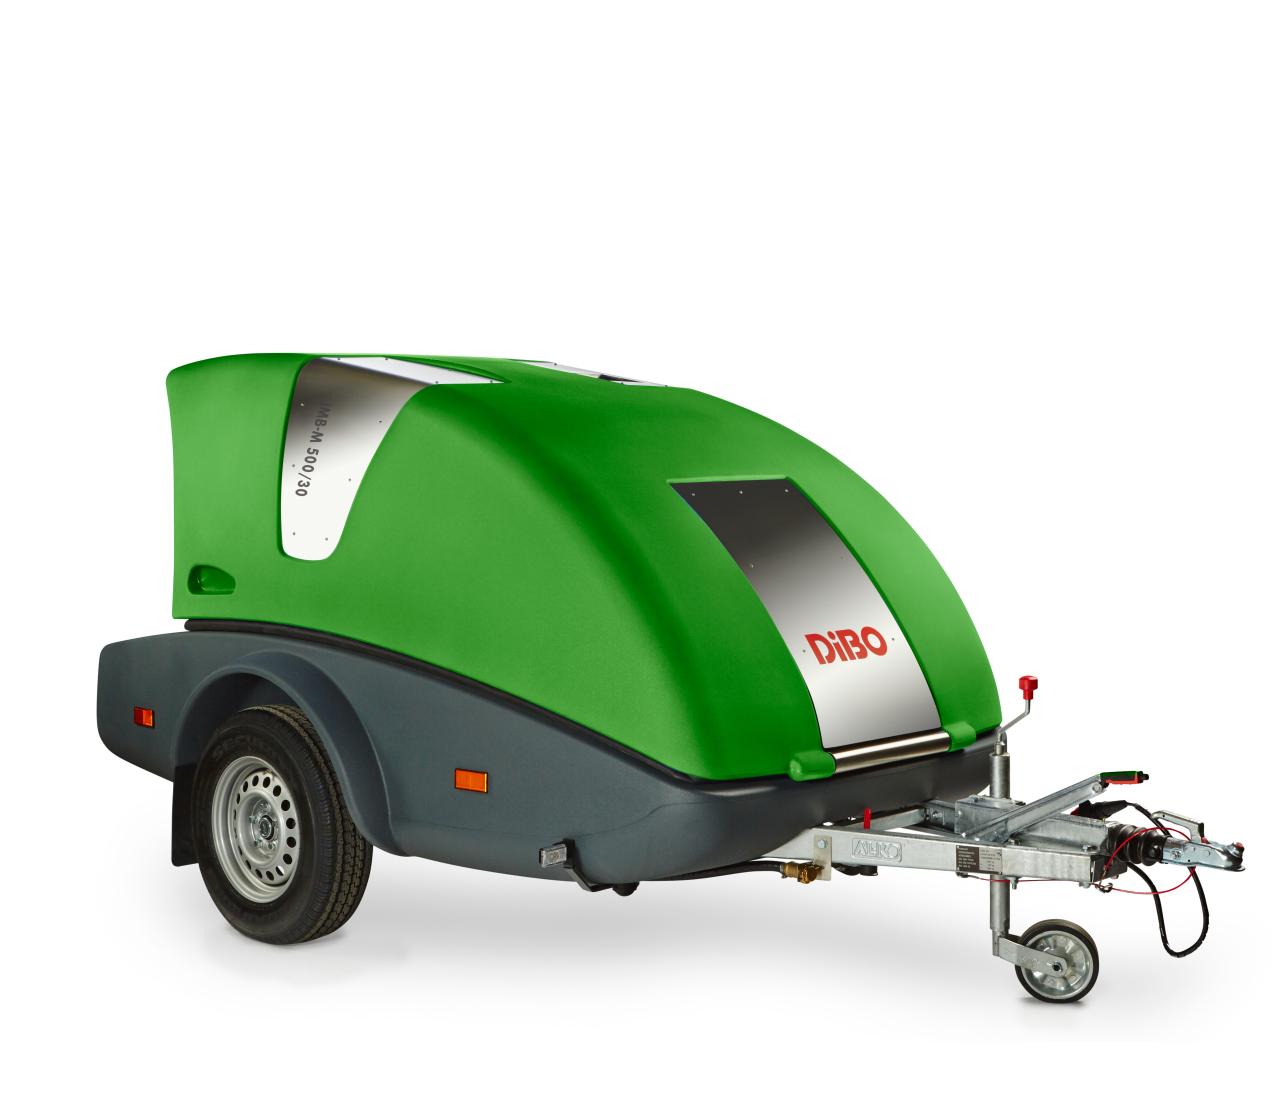 DiBO JMB-M hot water high-pressure trailer is versatile and equipped with the latest green technologies